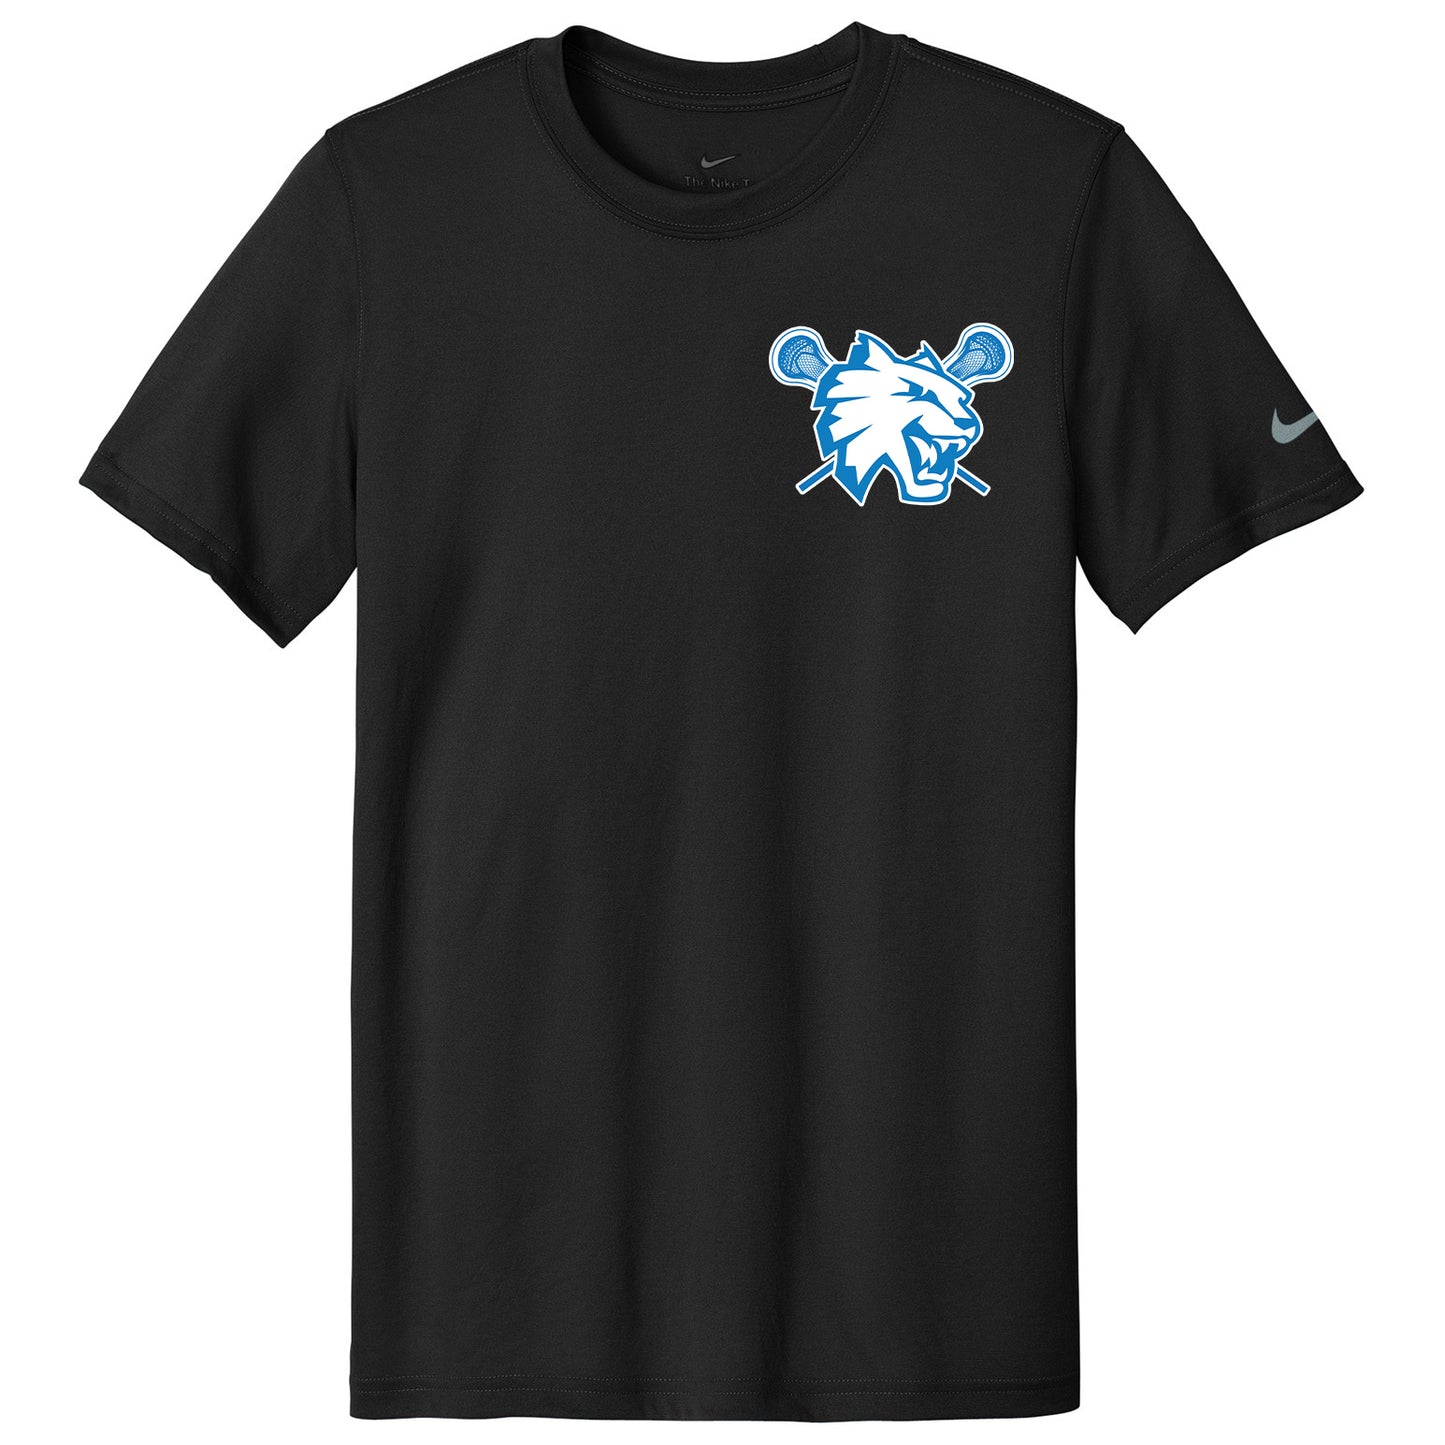 Suffield Youth Lacrosse - Ladies Nike Tee "Cat Corner" - NKDX8734 (color options available)